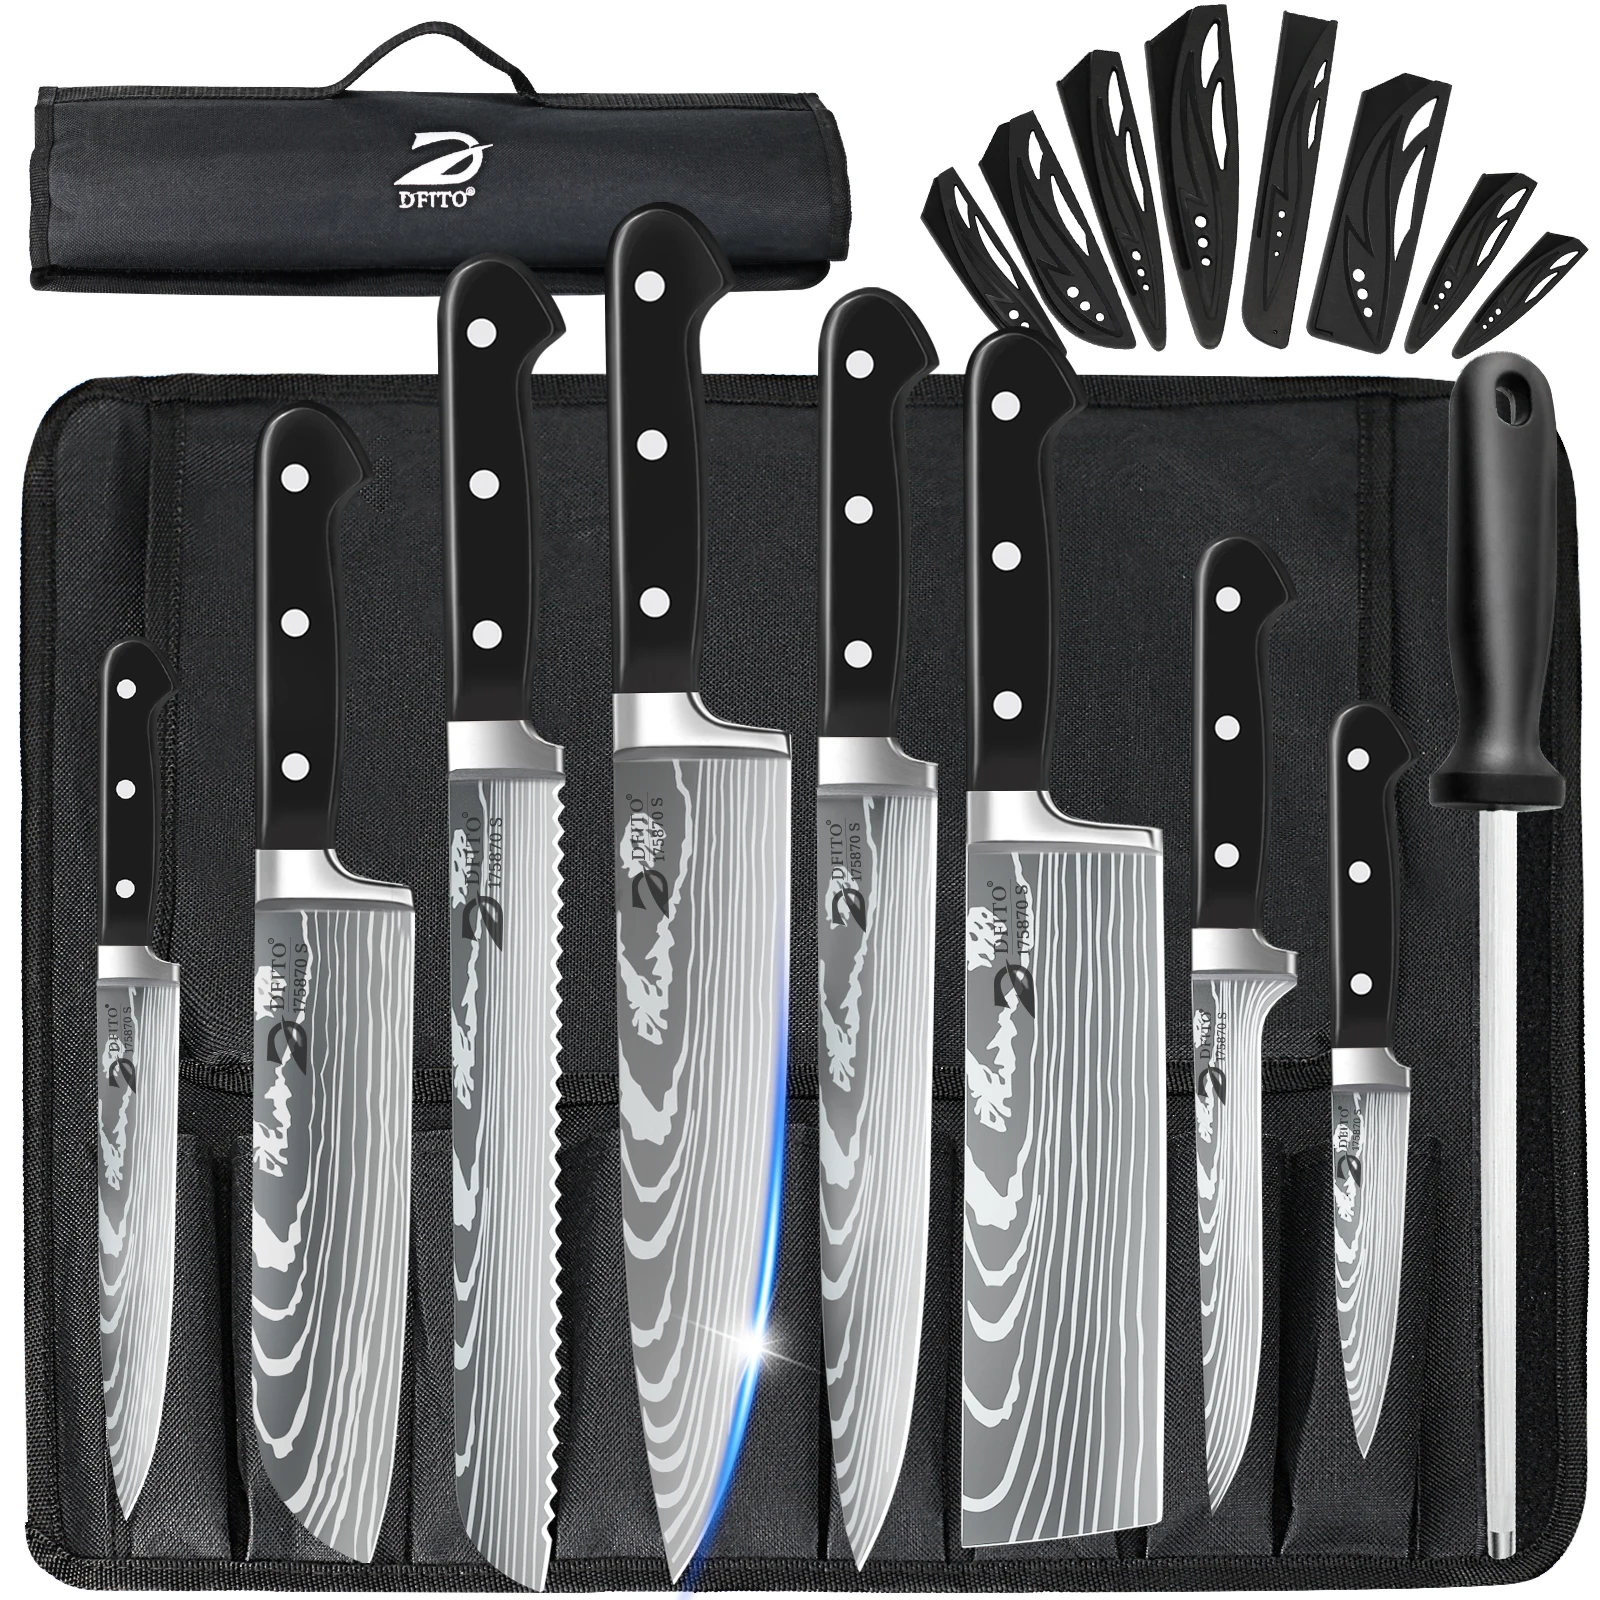 

8pcs Utility Kitchen Knife Multifunction Cleaver Paring Bread Cutter Chef Special Knife Sets With Knife Cover and Nylon Bag